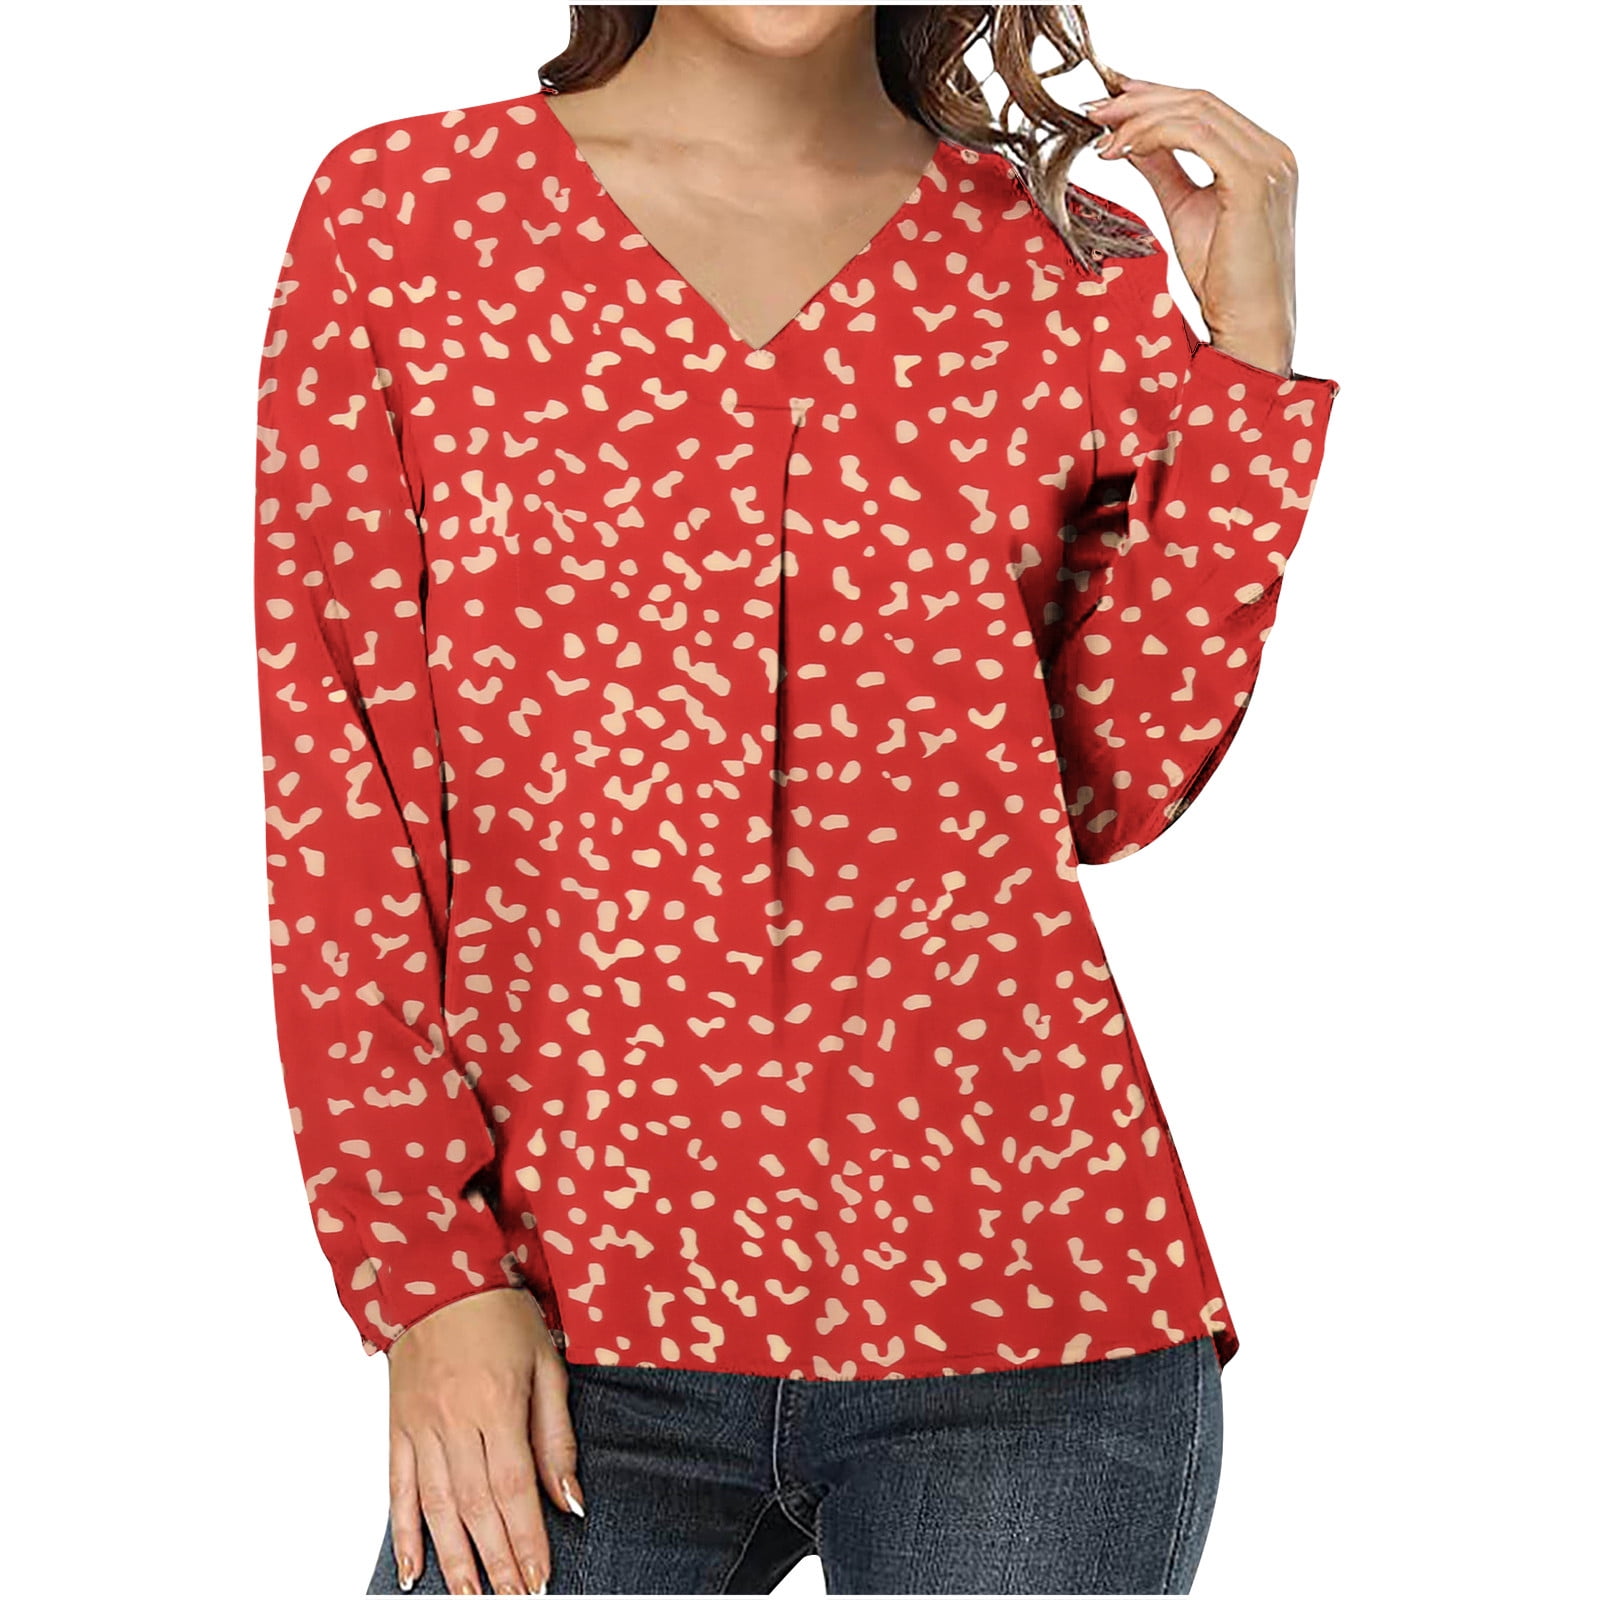 Blouse For Women Red Polka Dots V-Neck Casual Long Sleeves Tops 